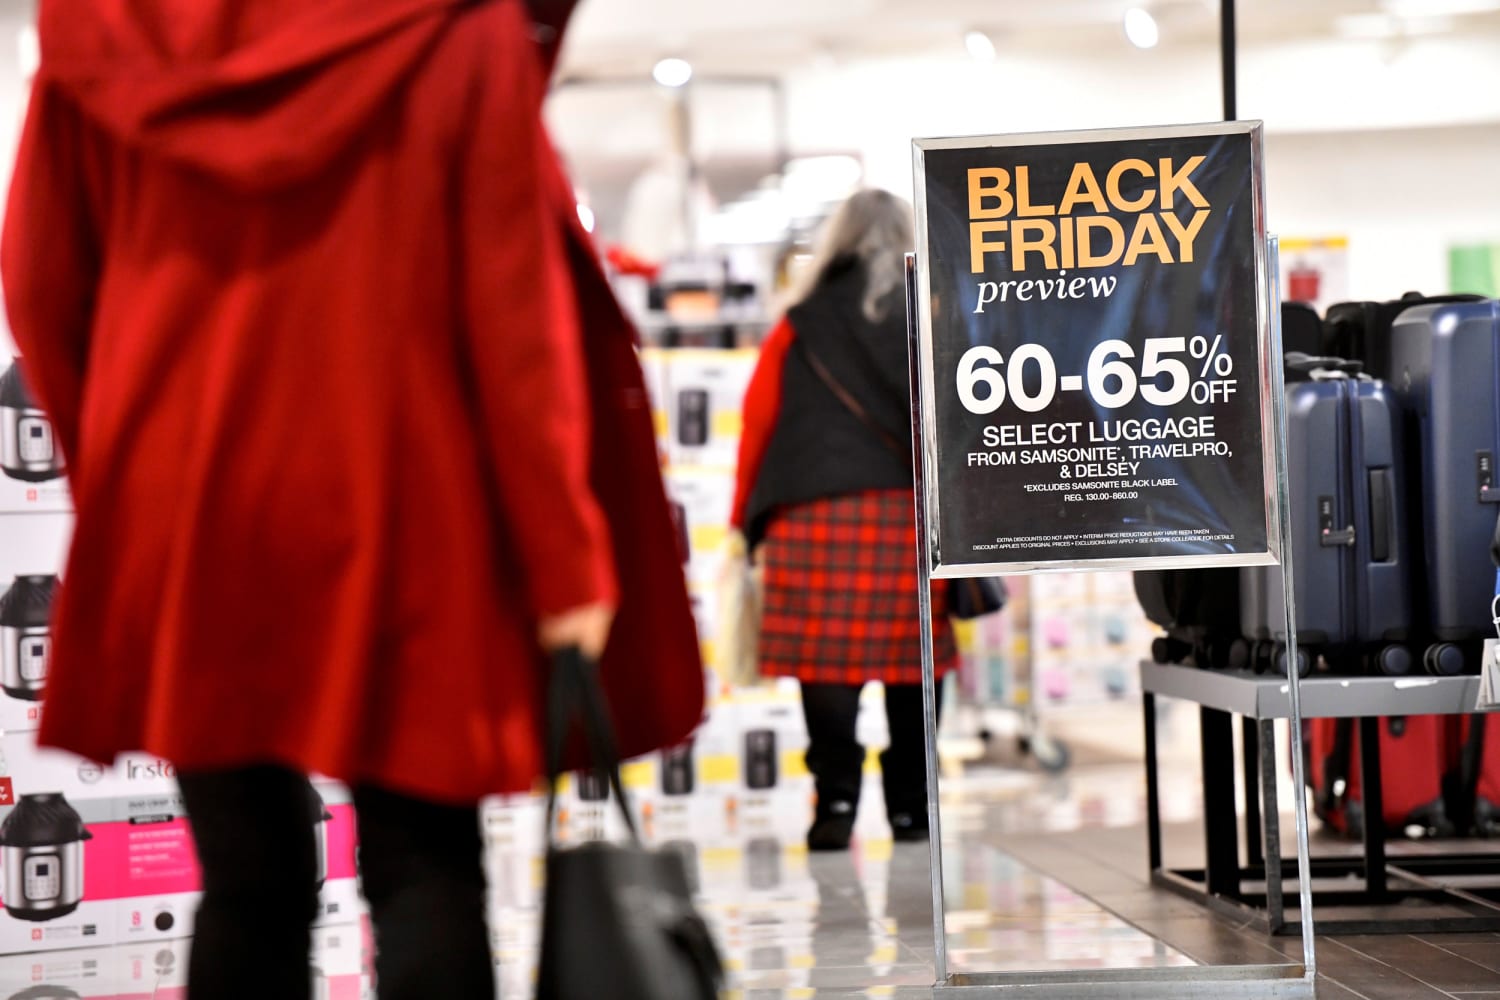 How To Find The Best Deals On Black Friday And Cyber Monday